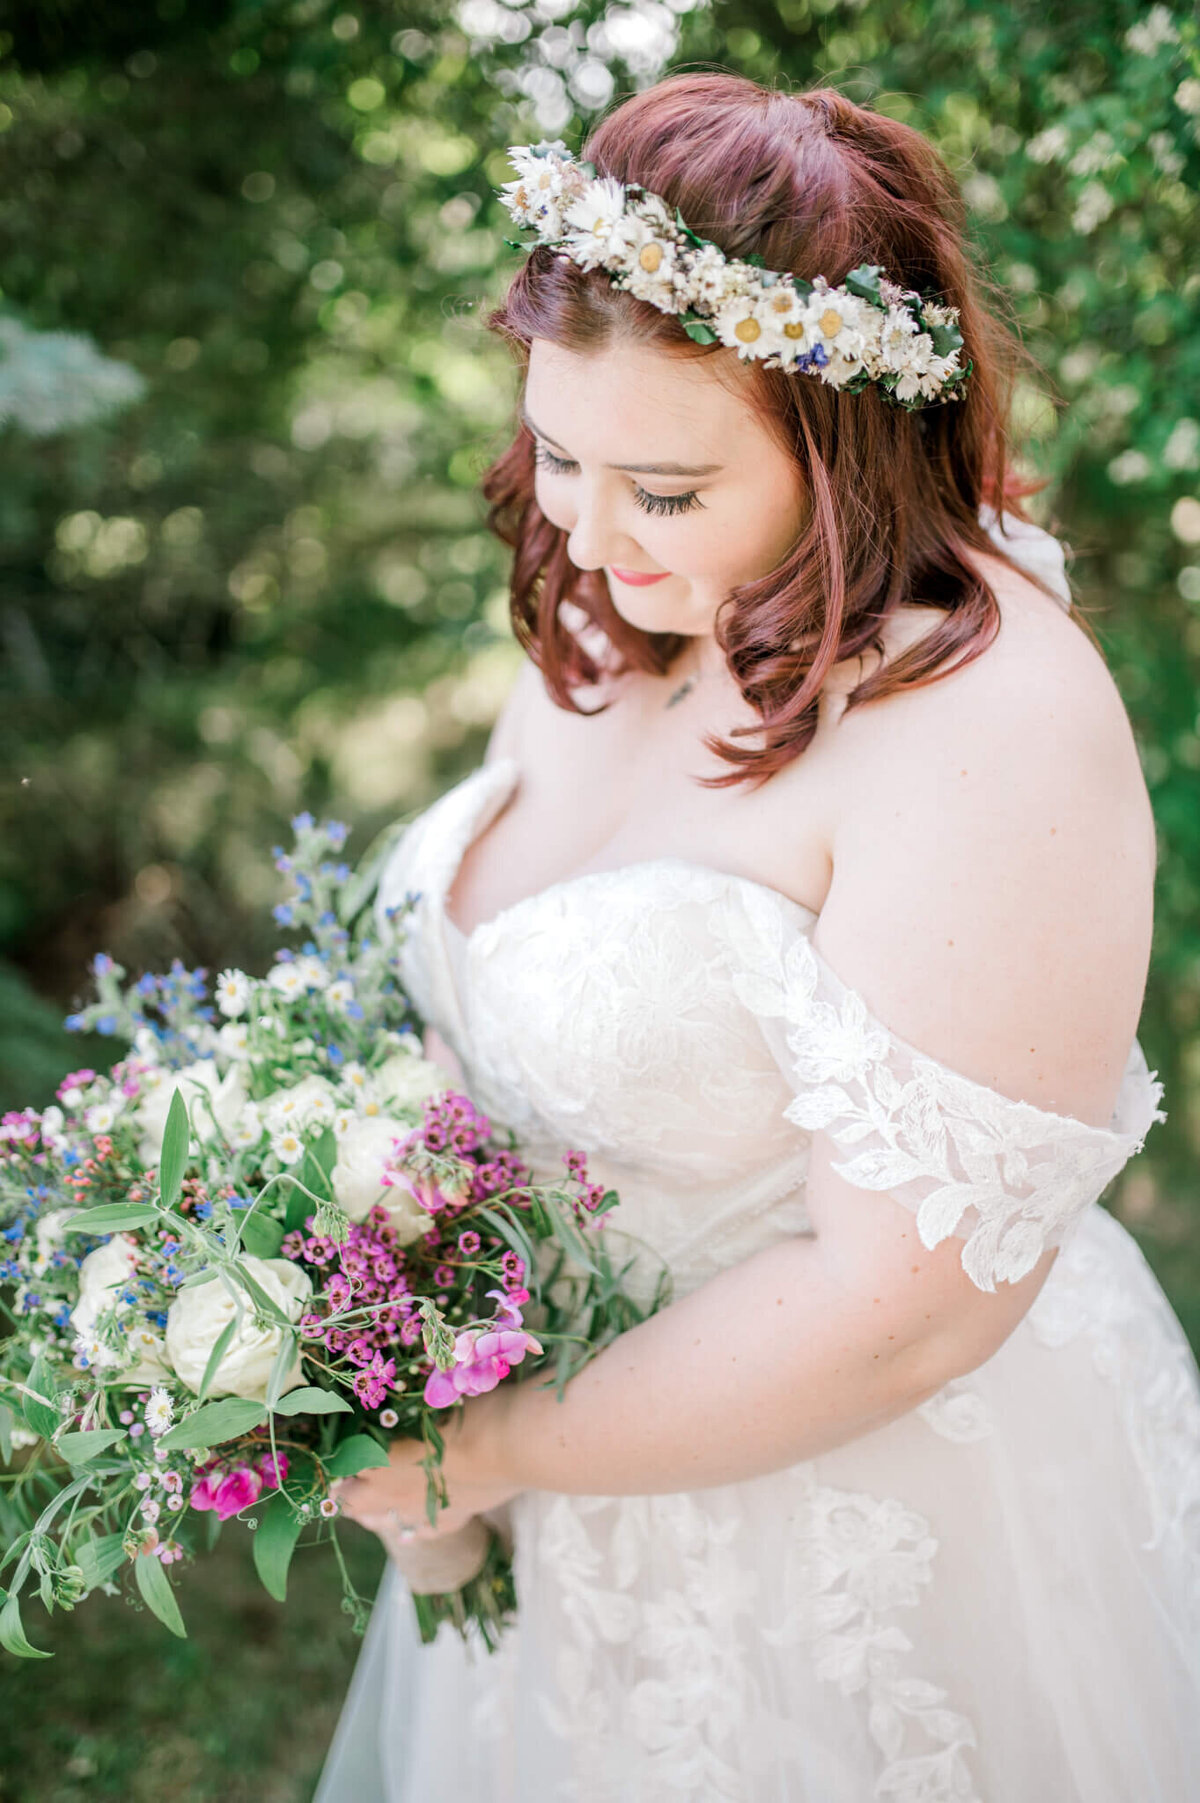 Bride holding bouquet while looking down at them